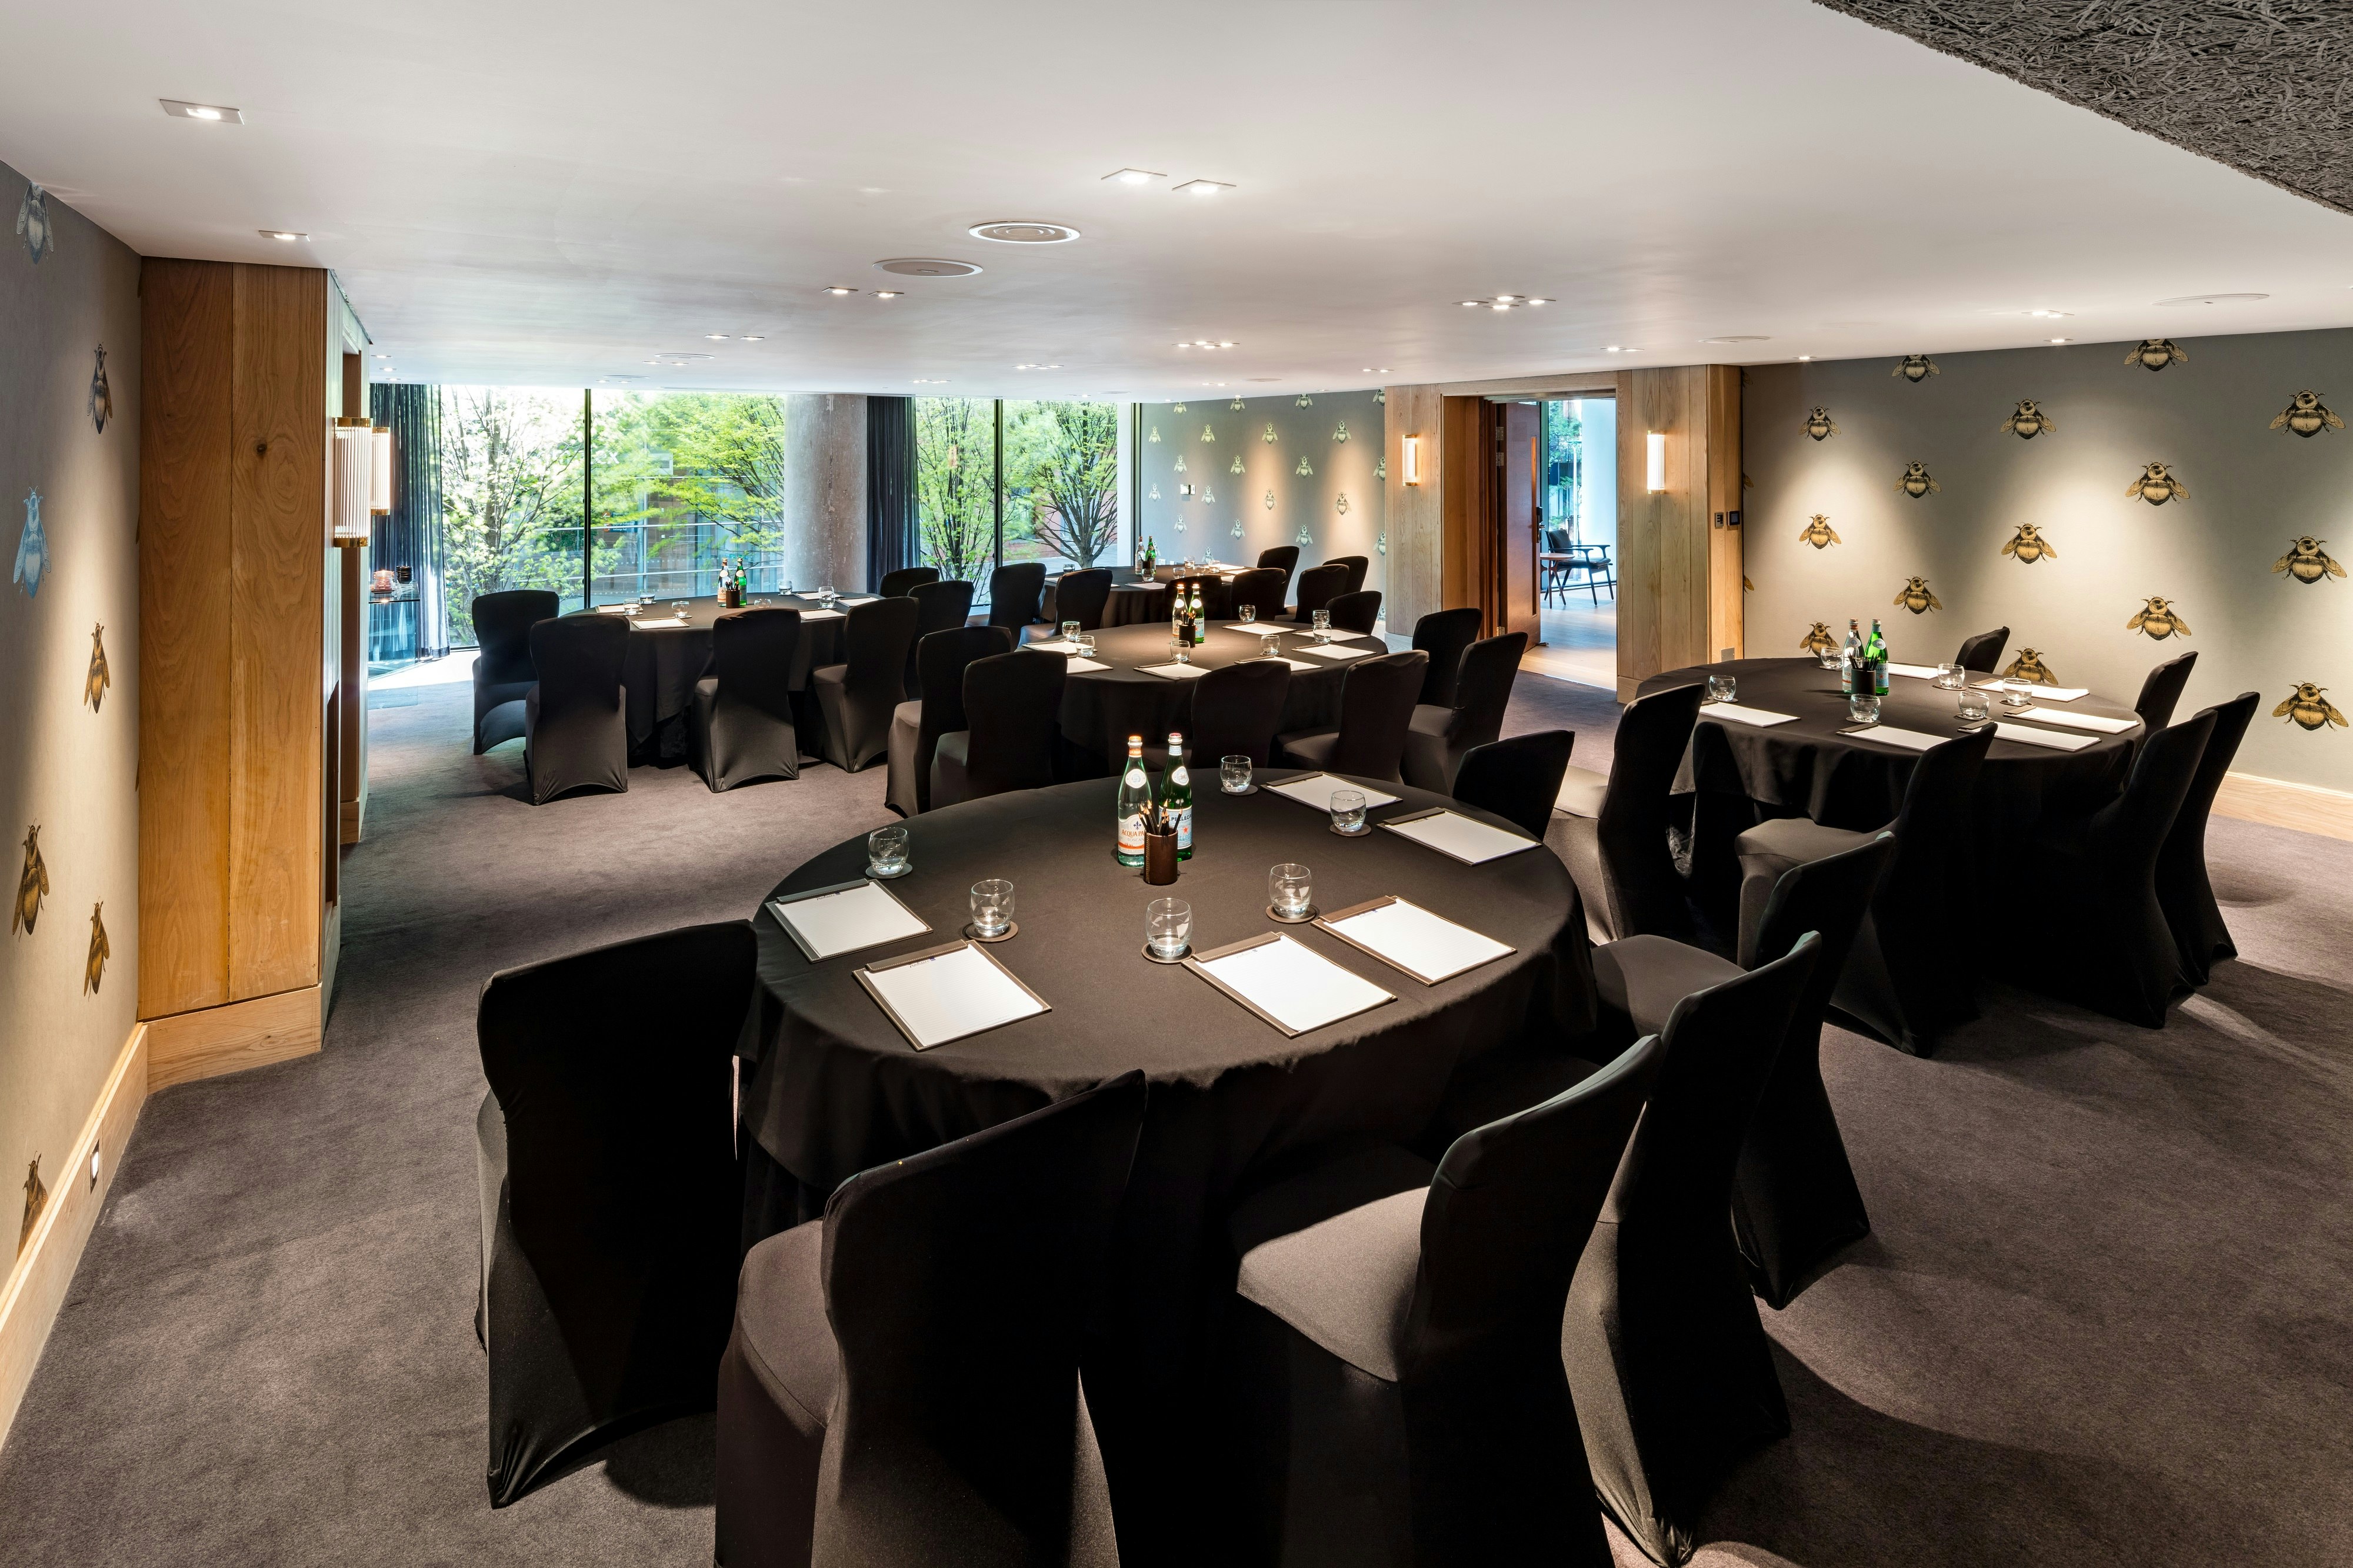 Bar Mitzvah Venues in Manchester - The Edwardian Manchester, A Radisson Collection Hotel